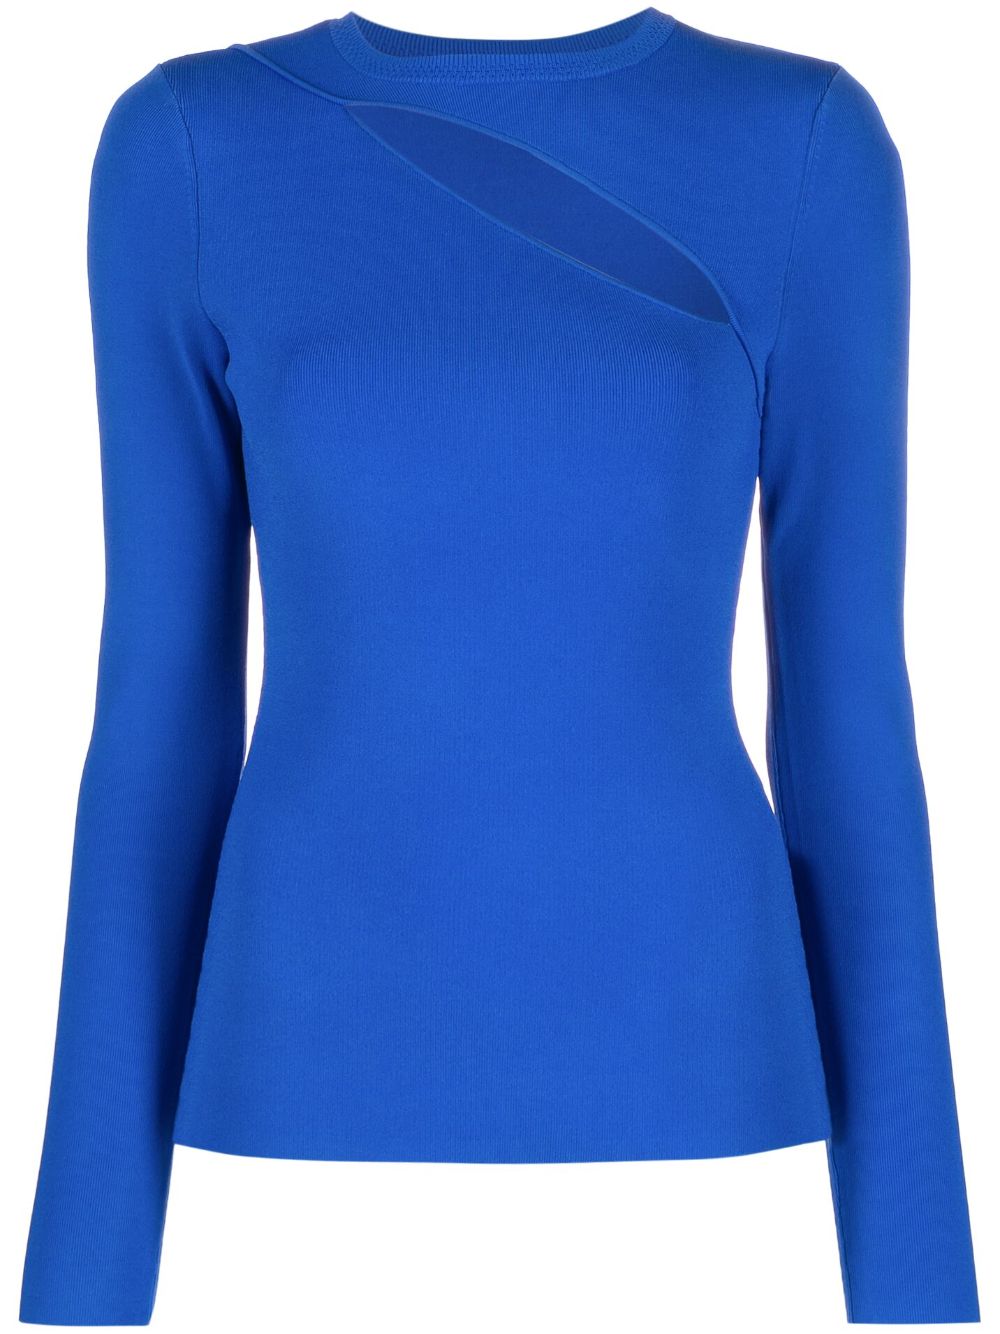 VICTORIA BECKHAM CUT-OUT RIBBED LONG-SLEEVE TOP